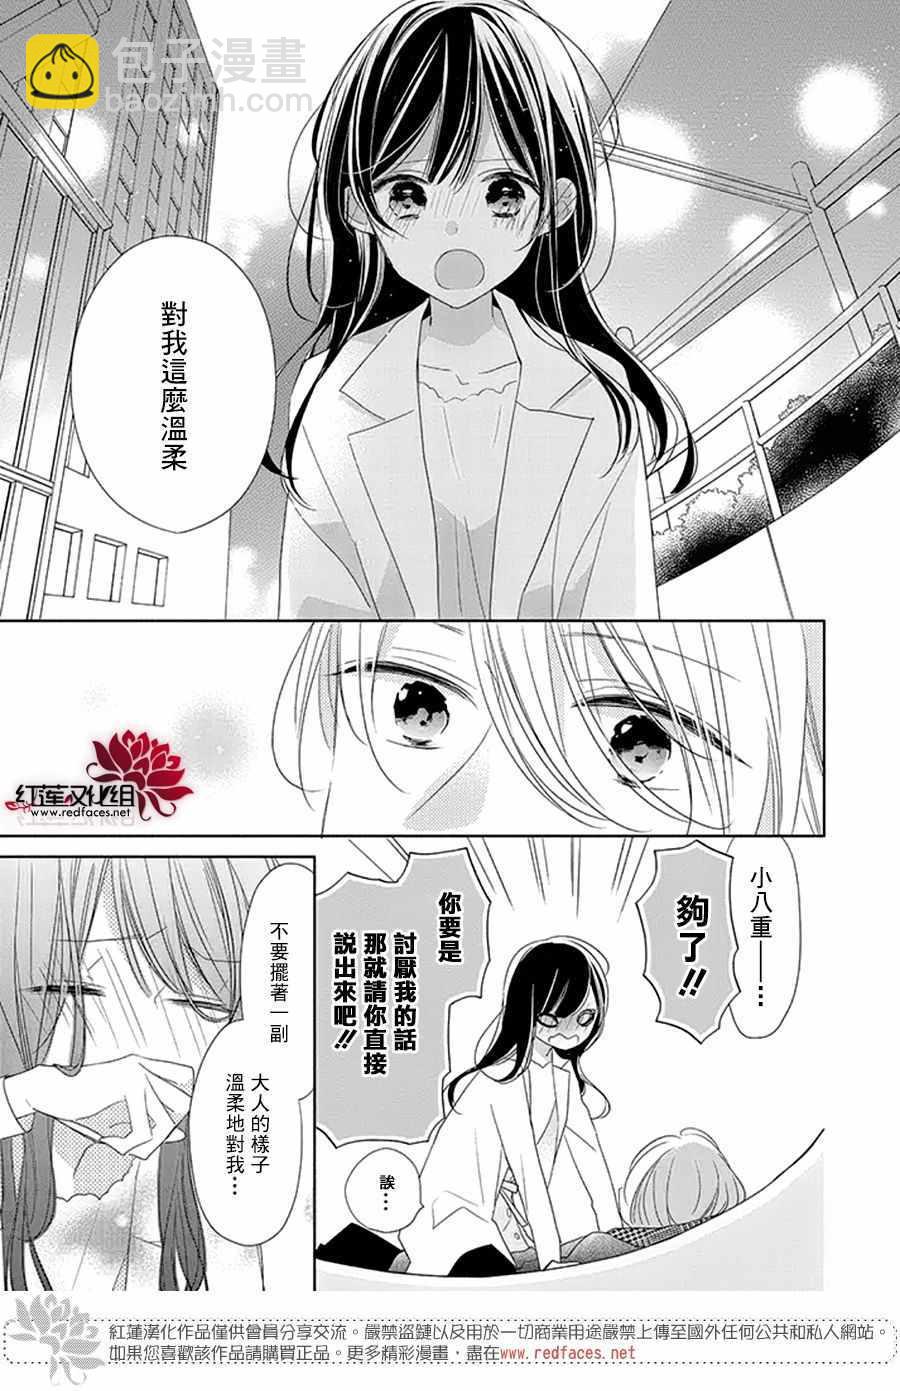 If given a second chance - 20話 - 1